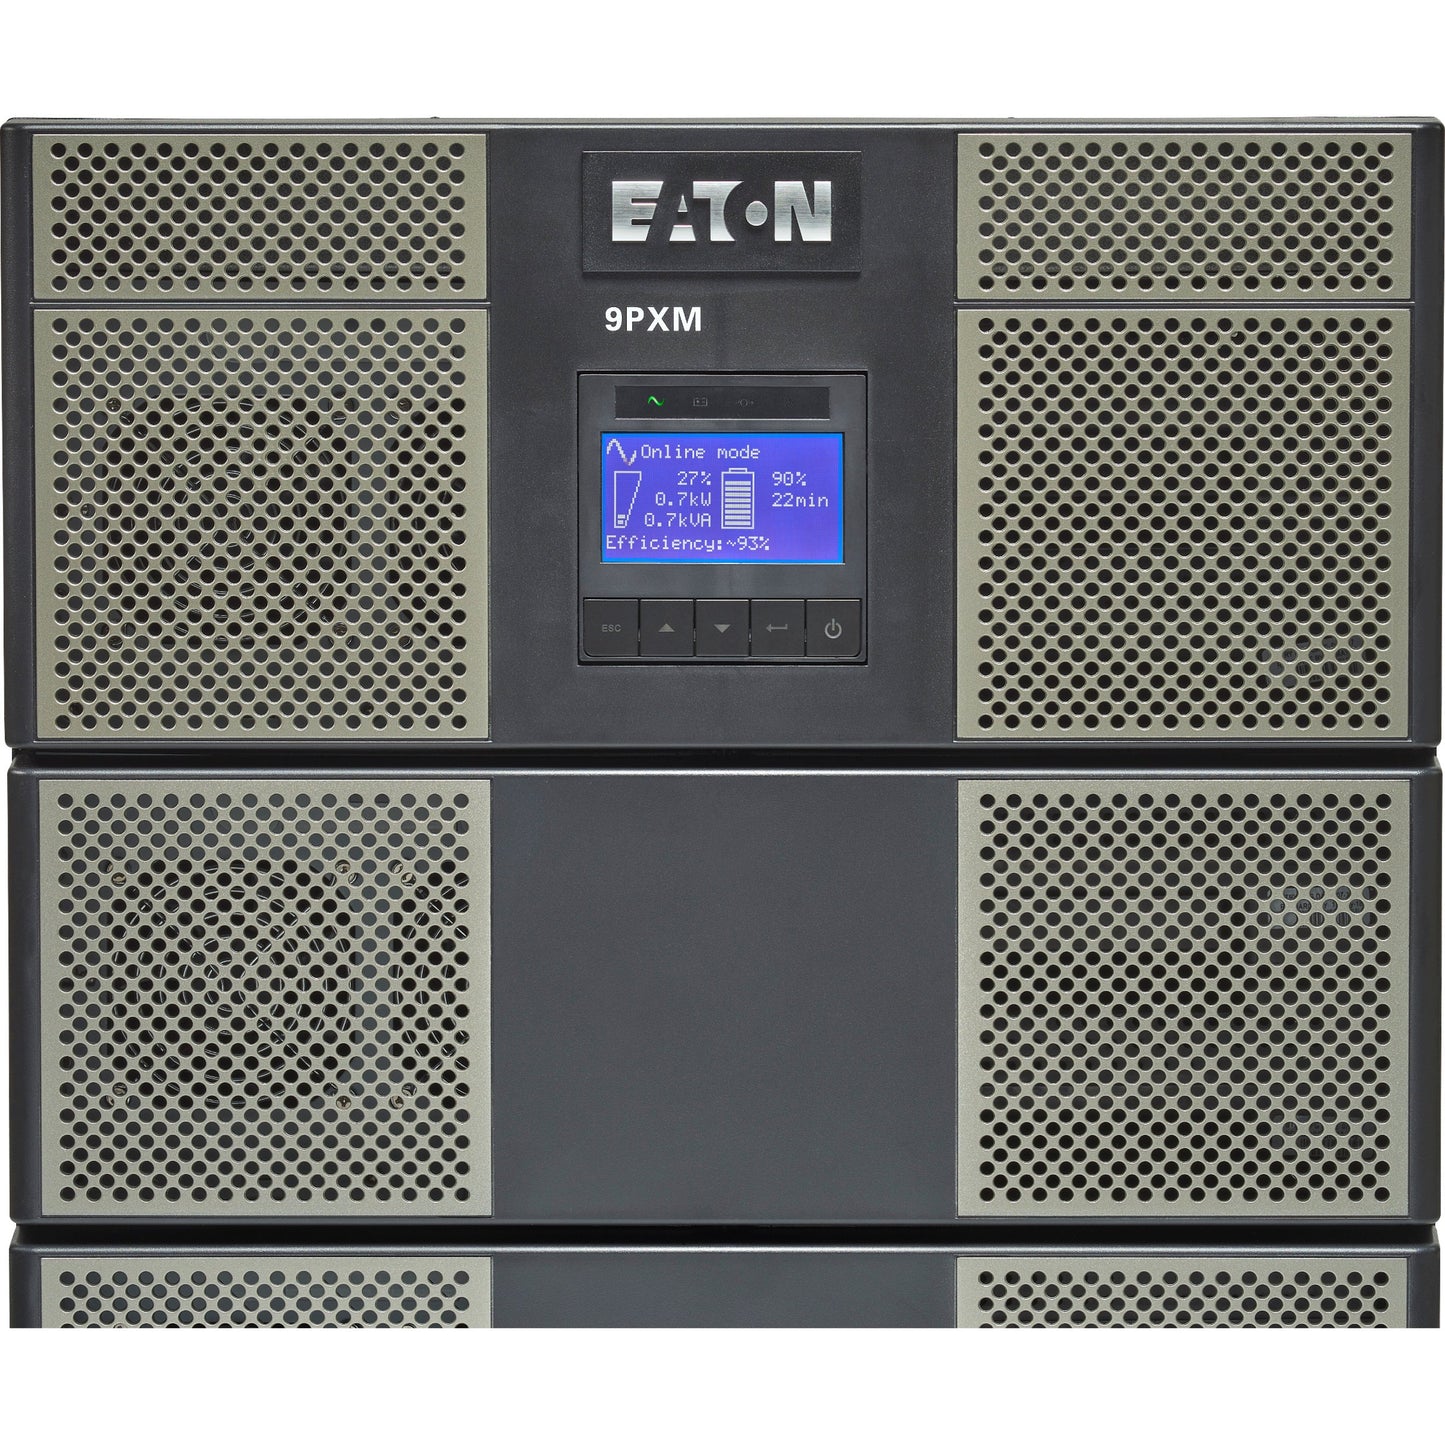 Eaton 9PXM UPS 16kVA 14.4kW 208-240V N+1 Modular Scalable Online Double-Conversion UPS Hardwired Input 4x 5-20R 2 L6-30R 2 L6-20R 2 L14-30R Outlets 21U